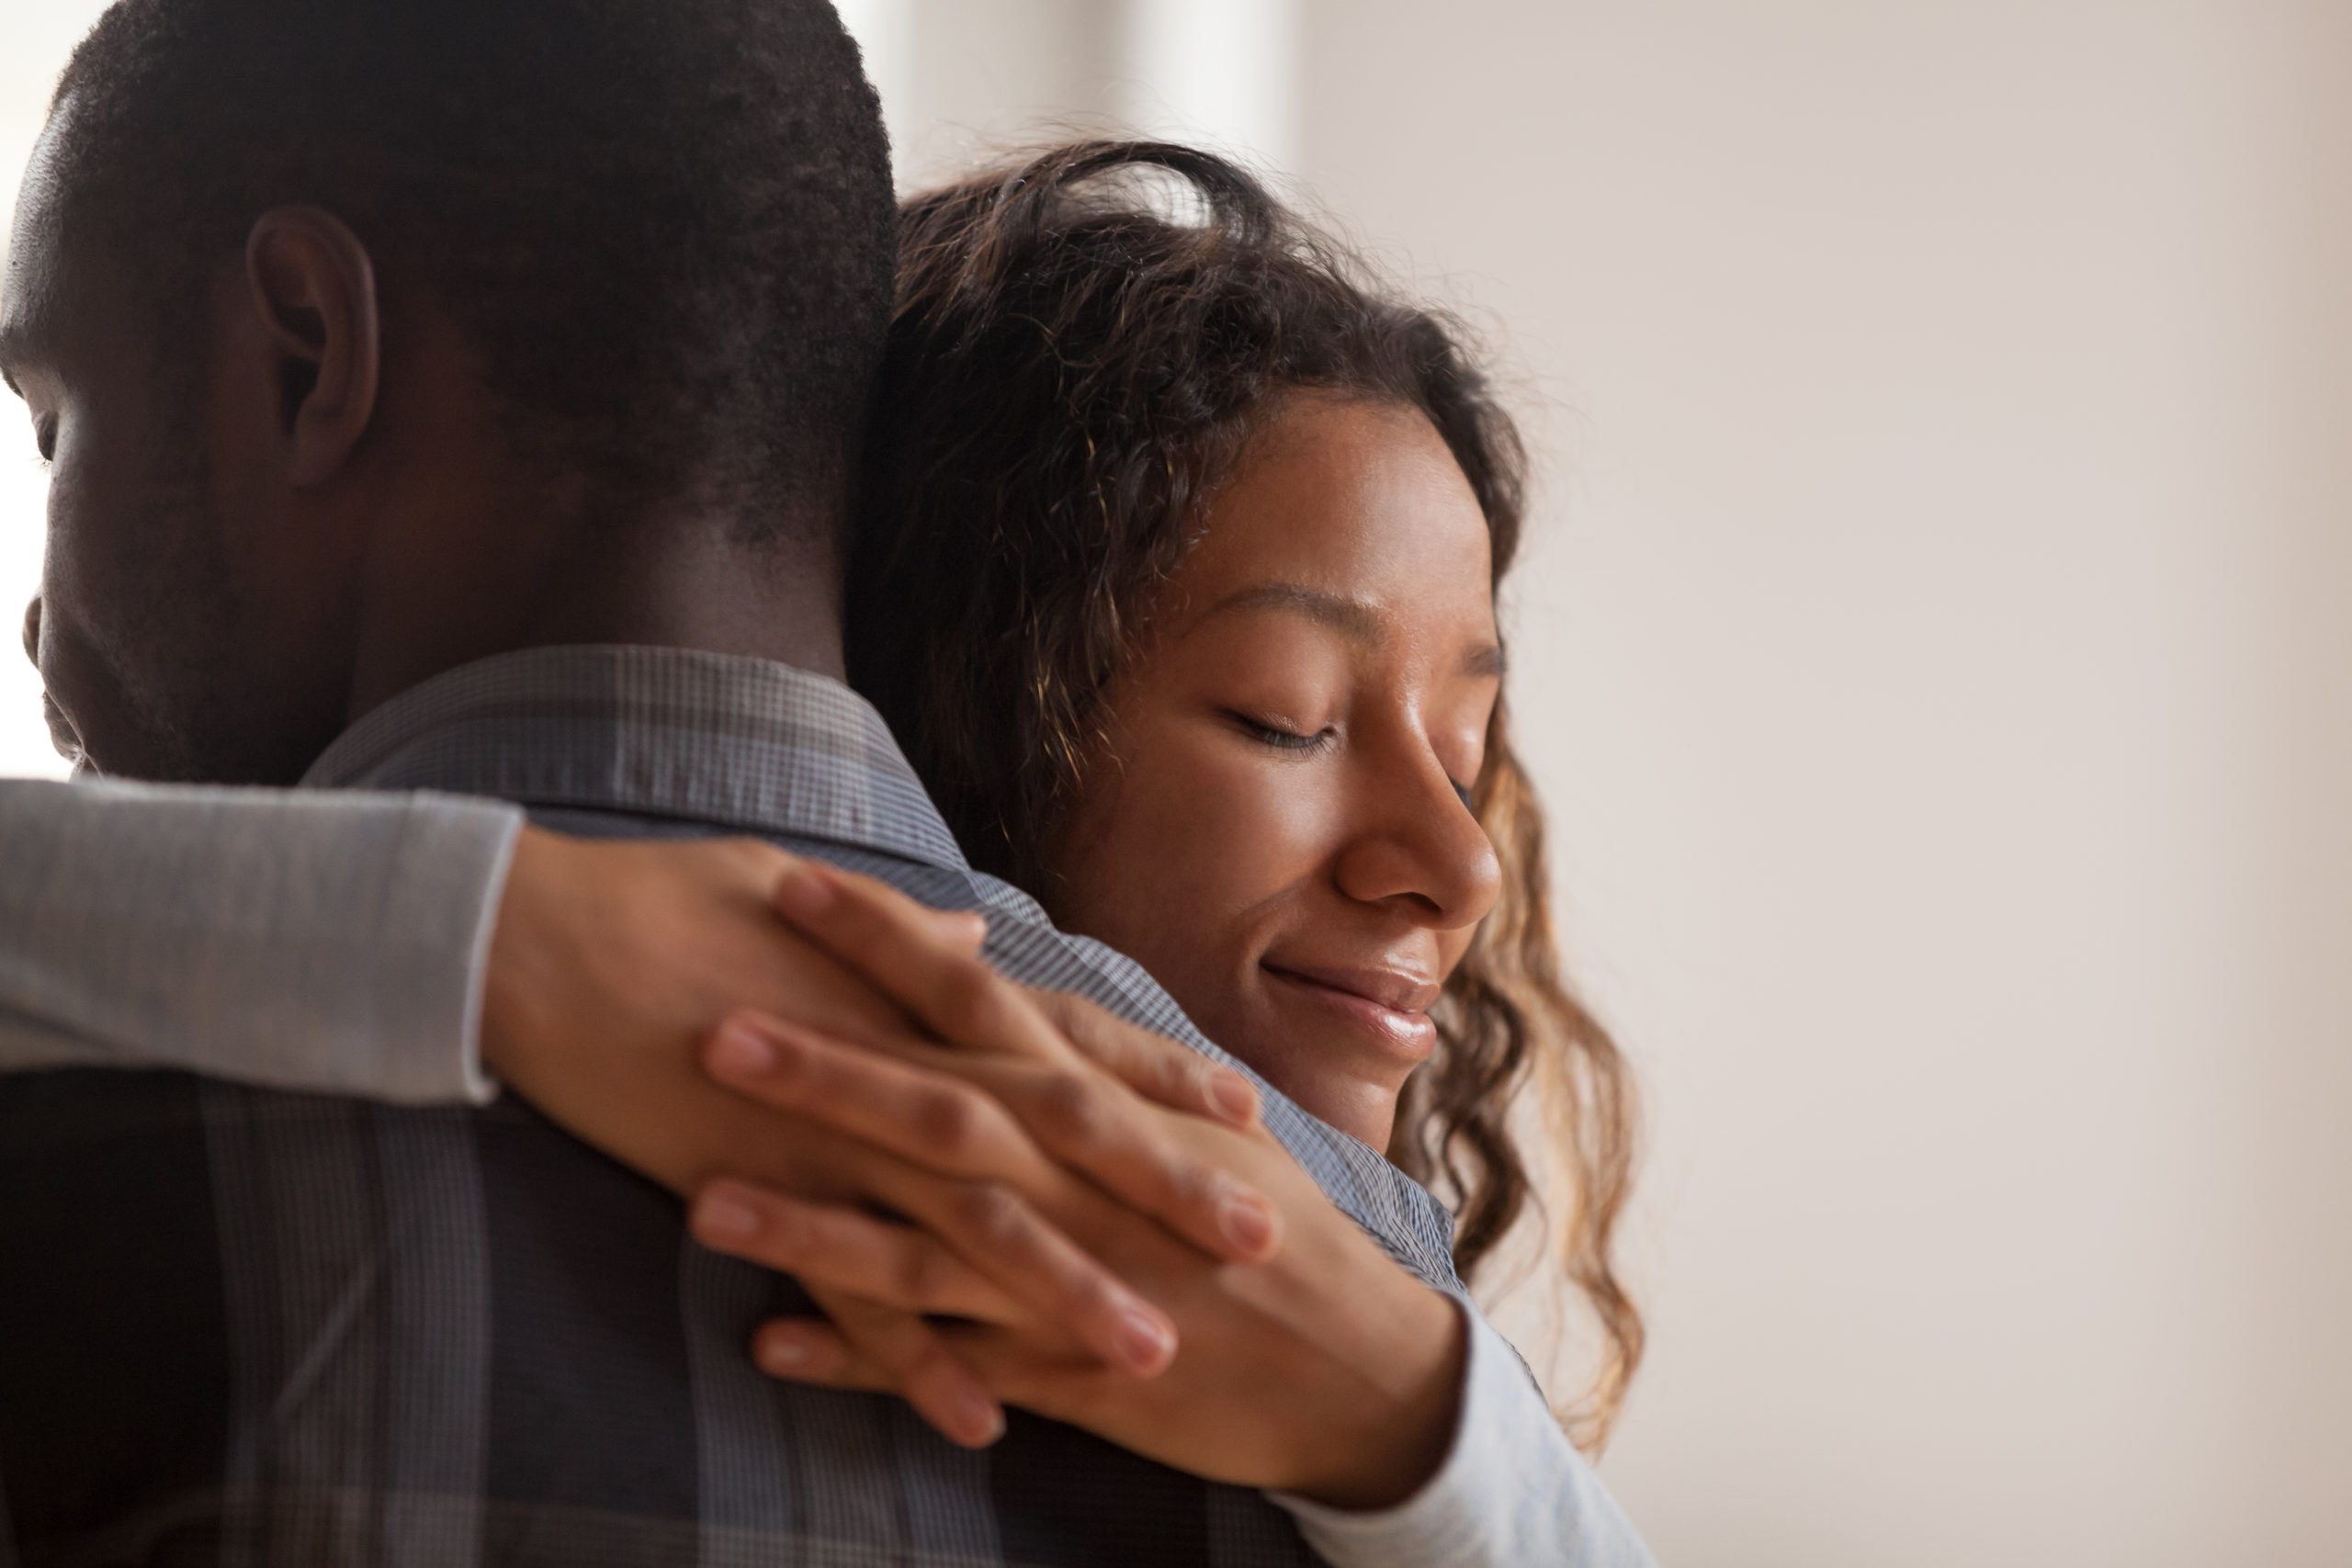 Close up young black american wife embracing husband. Portrait of woman with closed eyes, man rear view. Attractive affectionate couple in love, romantic relationship support and gratefulness concept